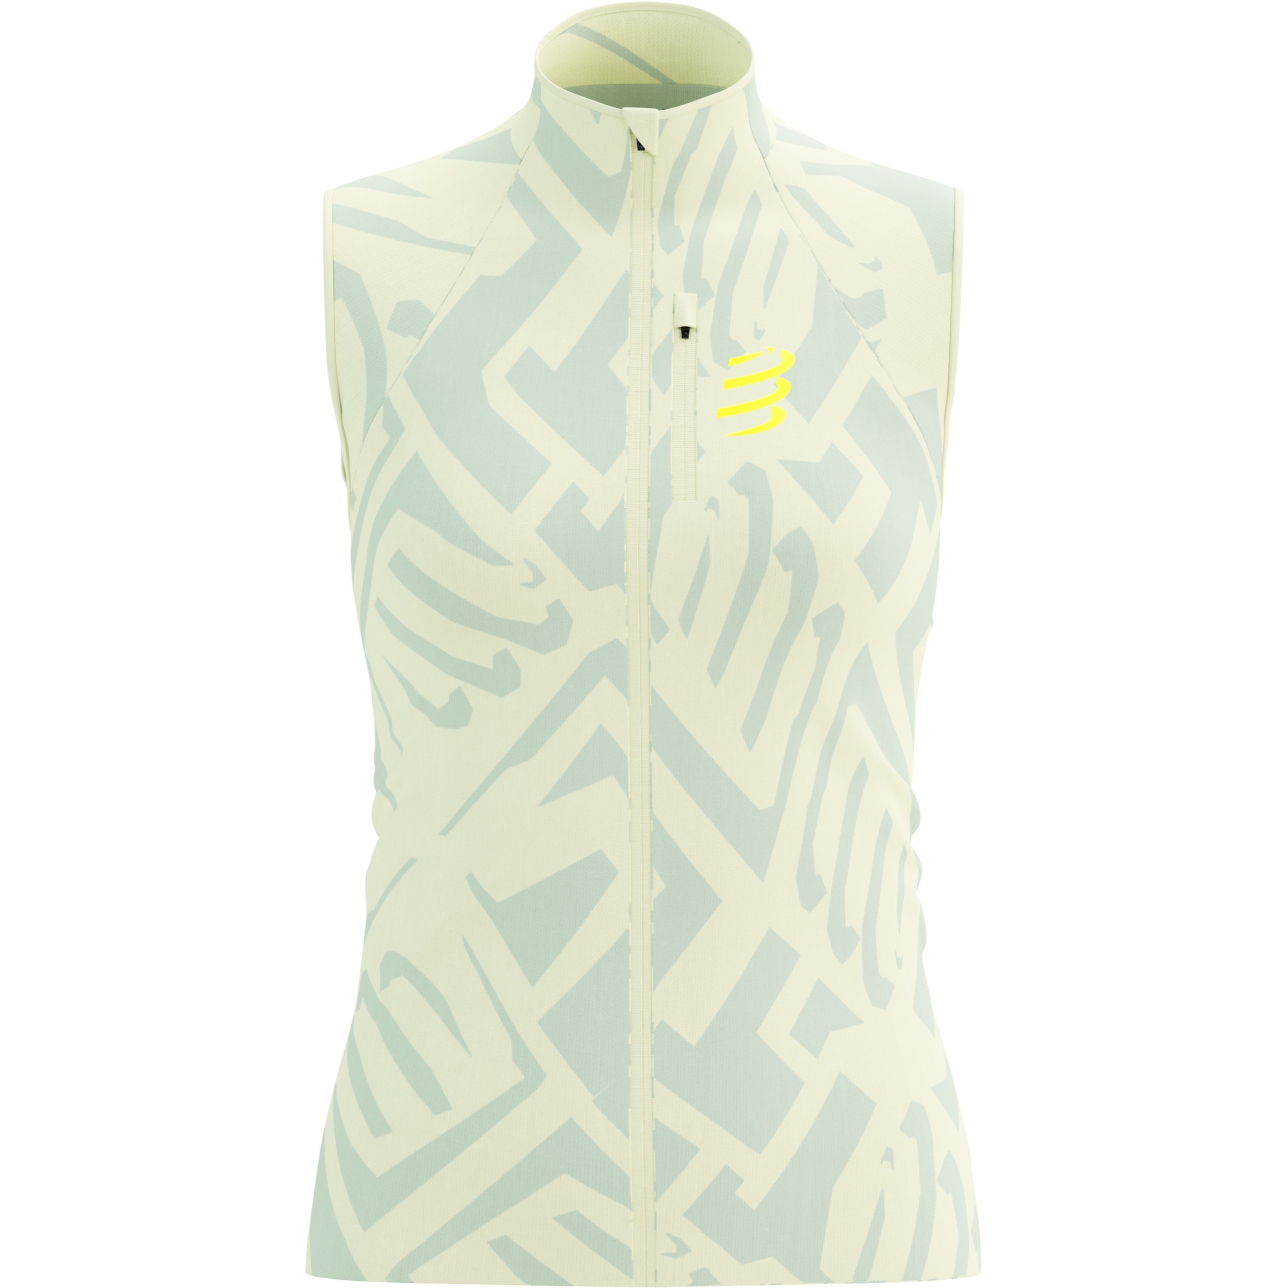 Picture of Compressport Hurricane Windproof Vest Women - sugar swizzle/ice flow/safety yellow